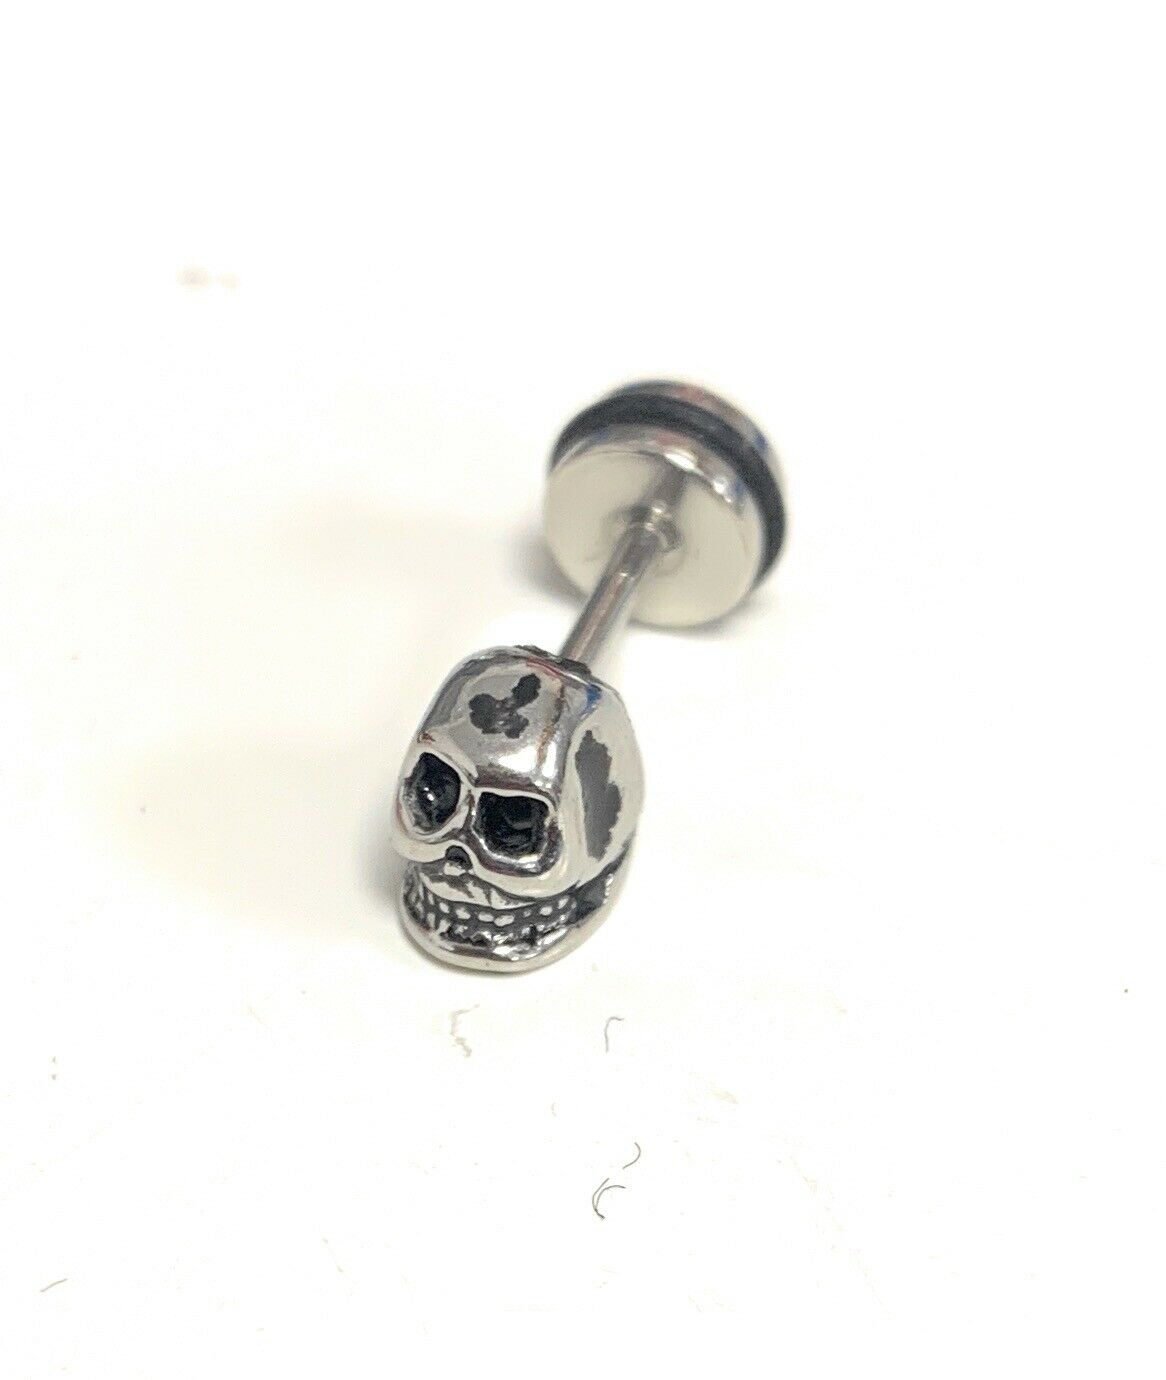 1 Skull Earring Surgical Stainless Steel Stud Body Jewelry Mens Silver Tone Gift